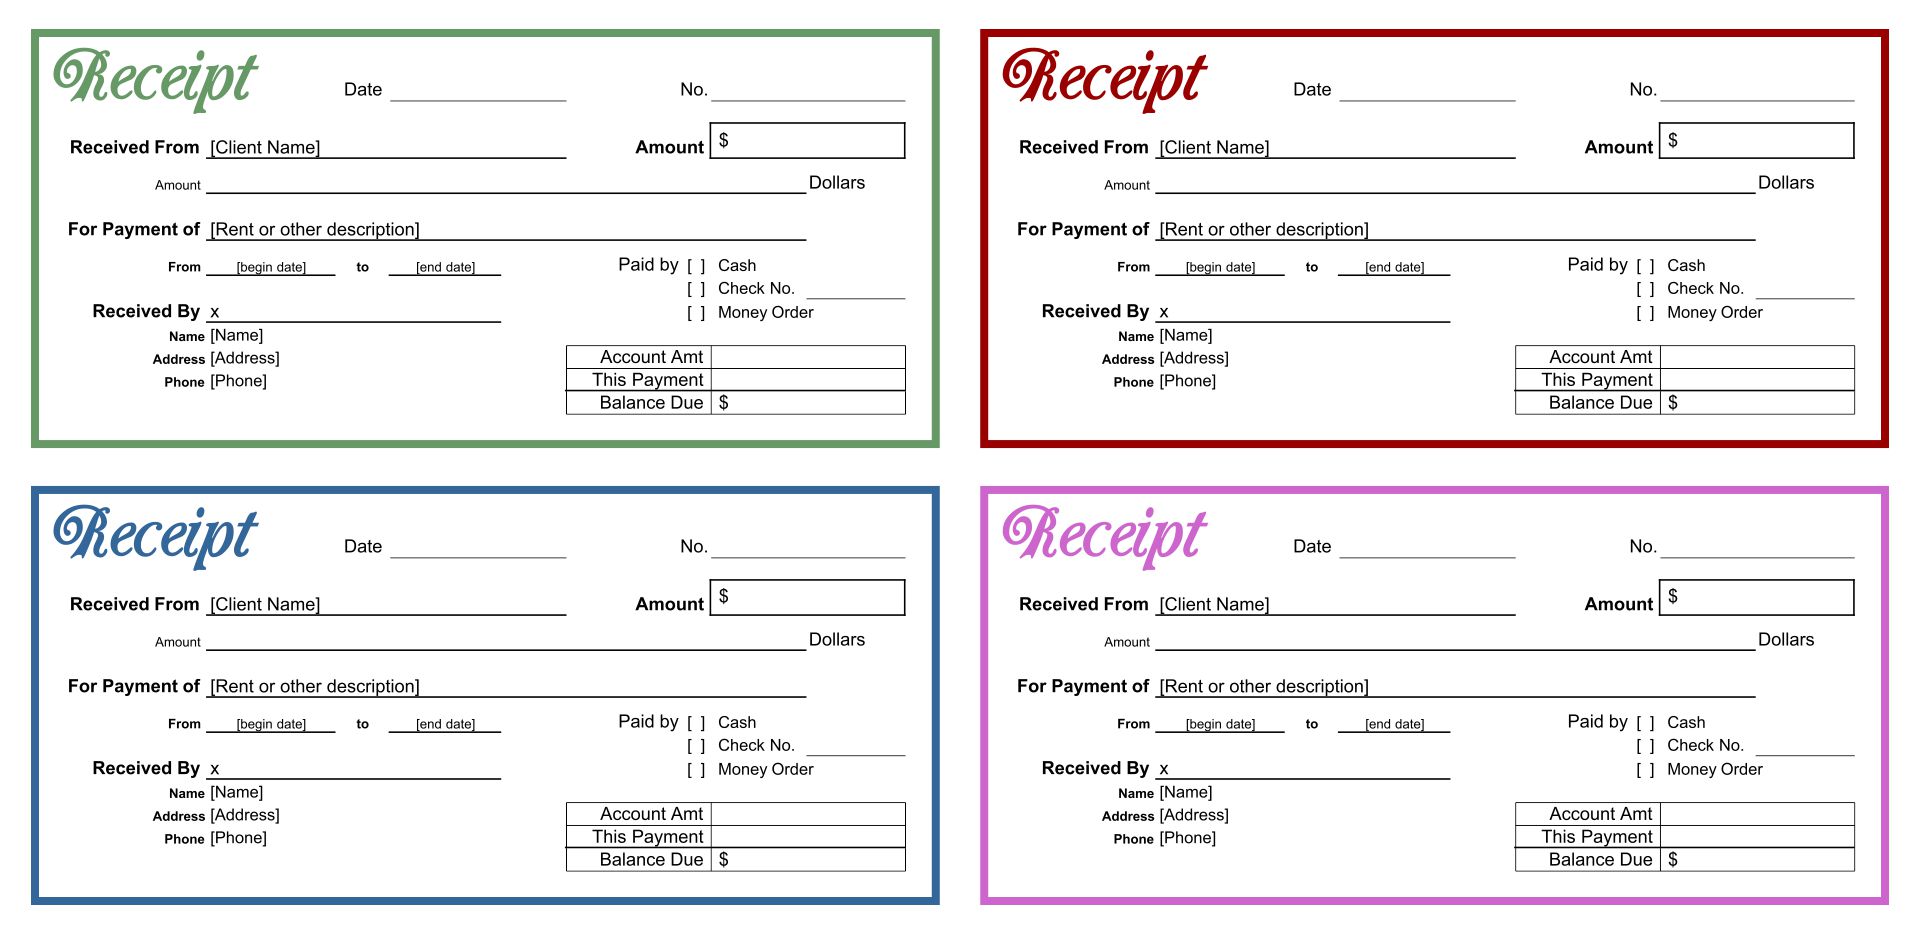 receipt-for-services-template-word-authentic-receipt-forms